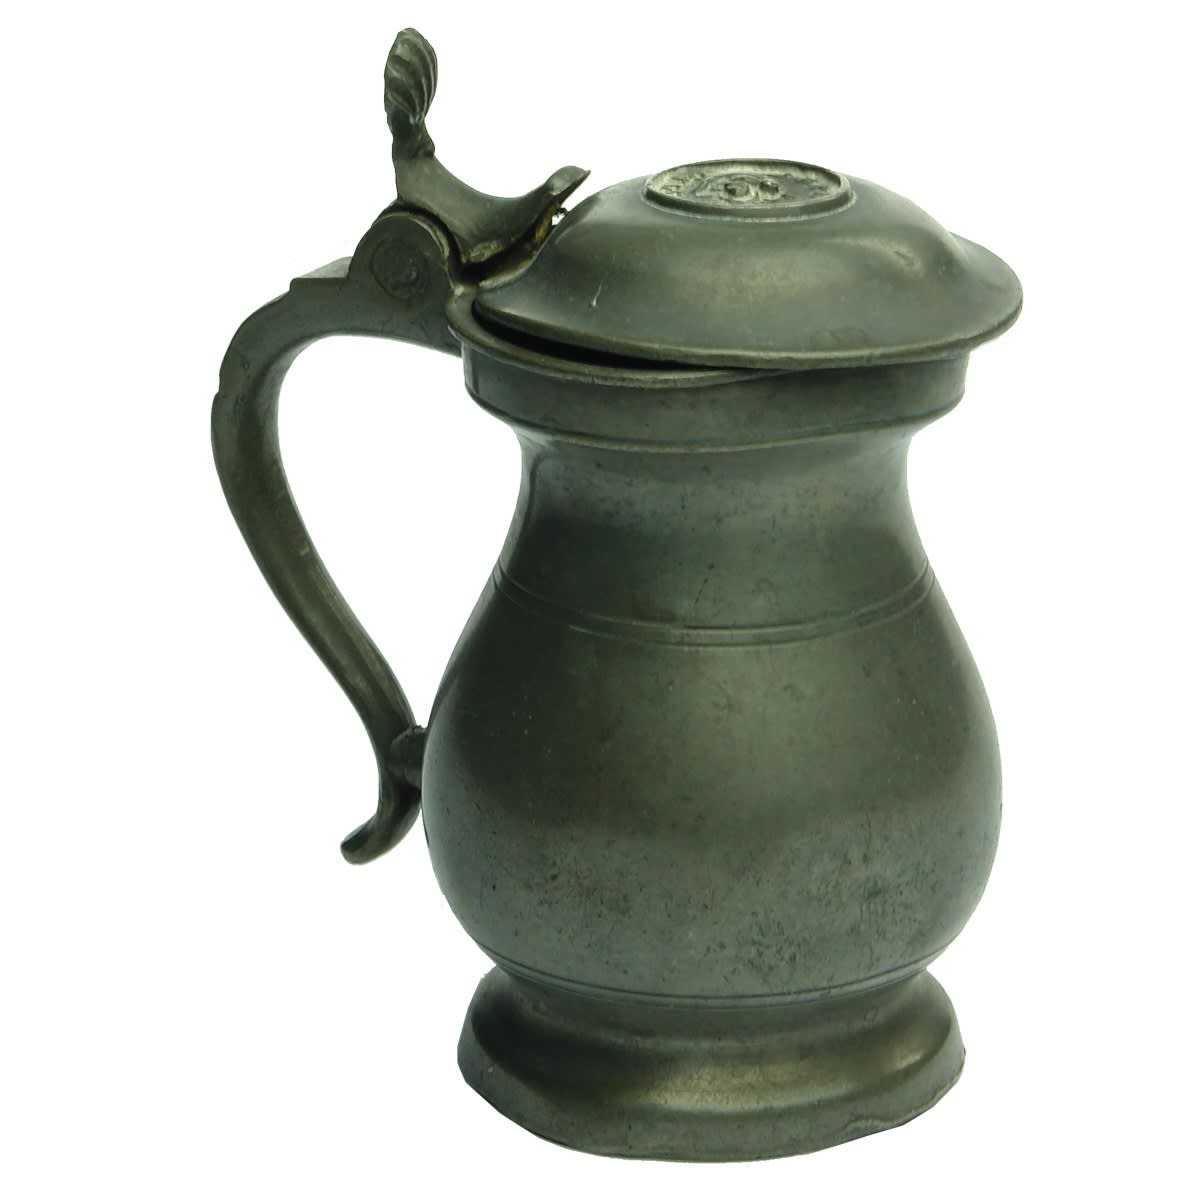 Lidded pewter tankard with Imperial Gill around a Crown on top.